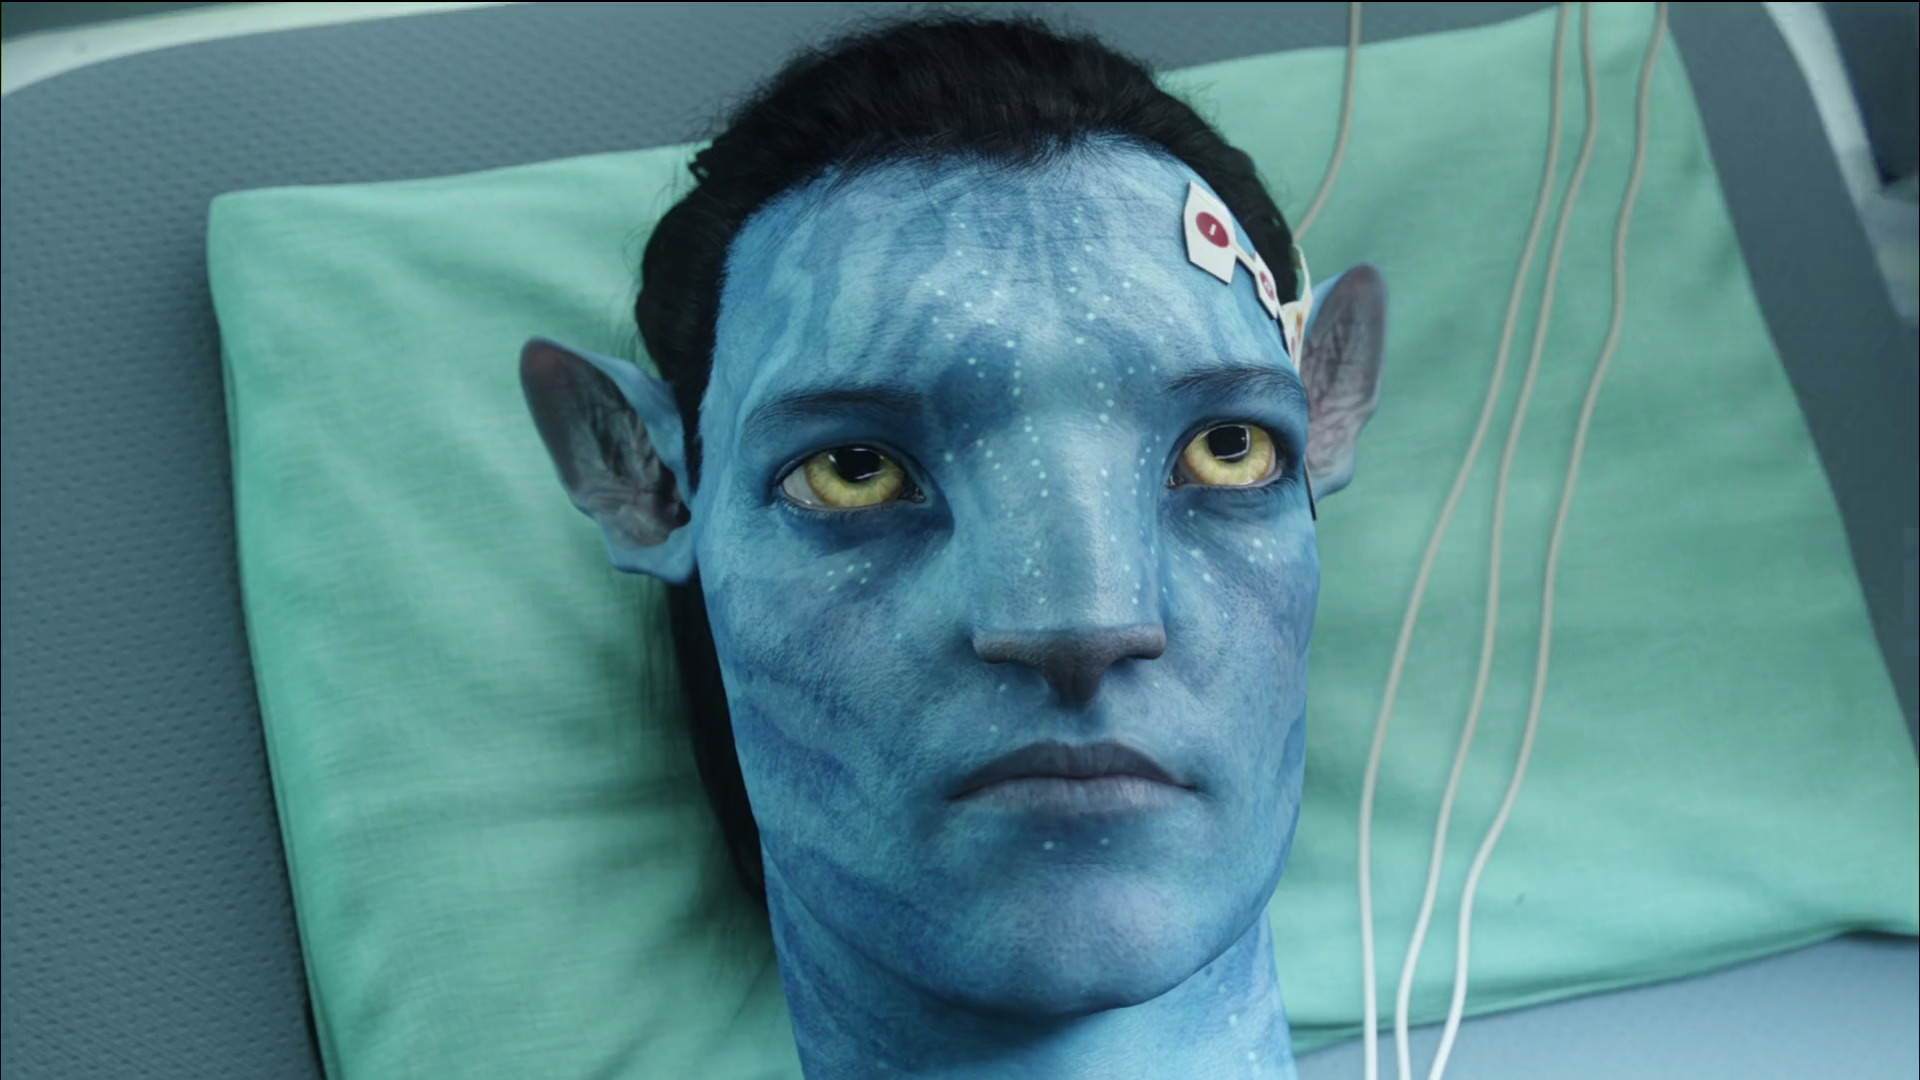 avatar full movie in tamil hd 720p download